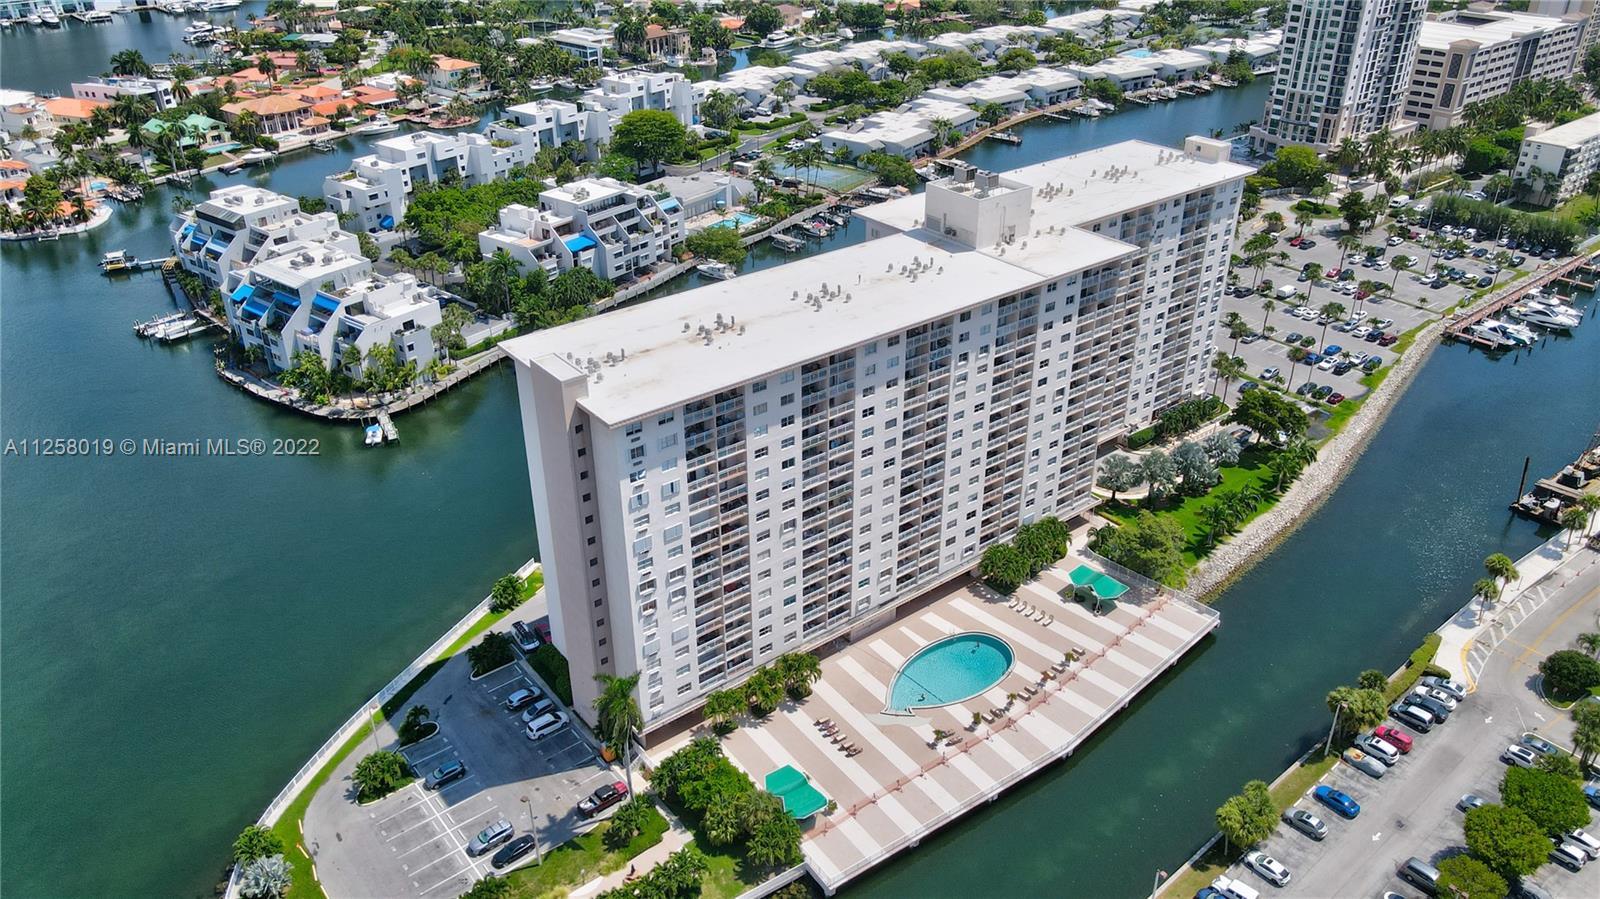 Your search is over! COMPLETELY REMODELED condo w/ ocean & Intracoastal waterview from every angle! 